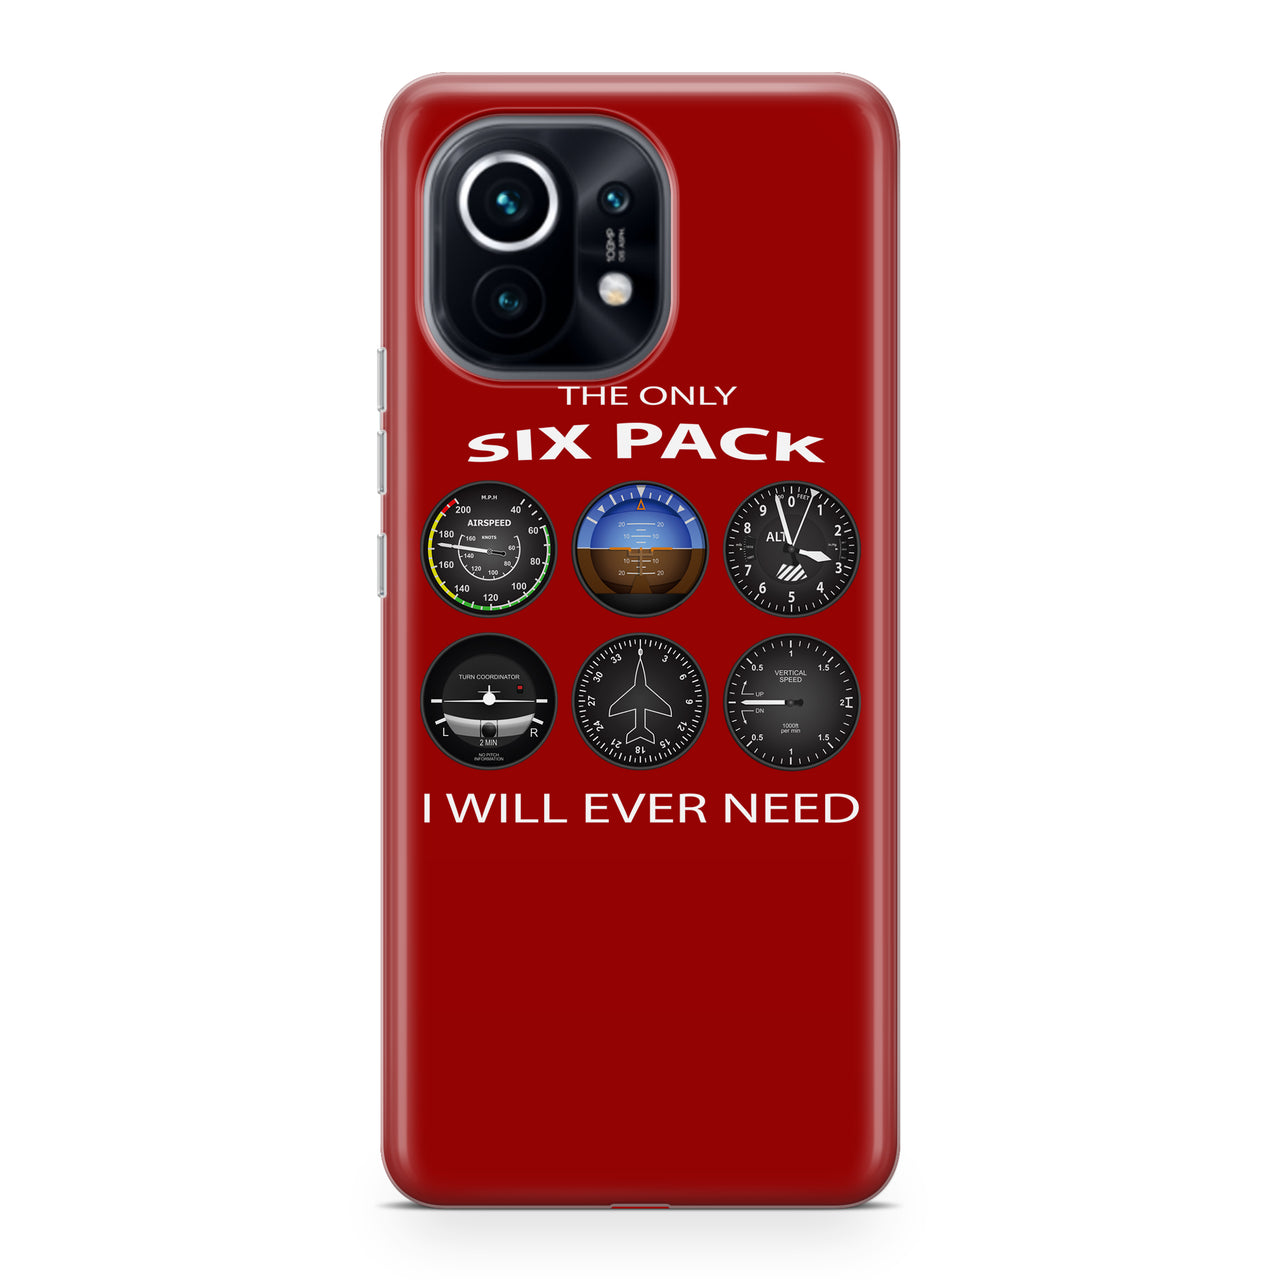 The Only Six Pack I Will Ever Need Designed Xiaomi Cases